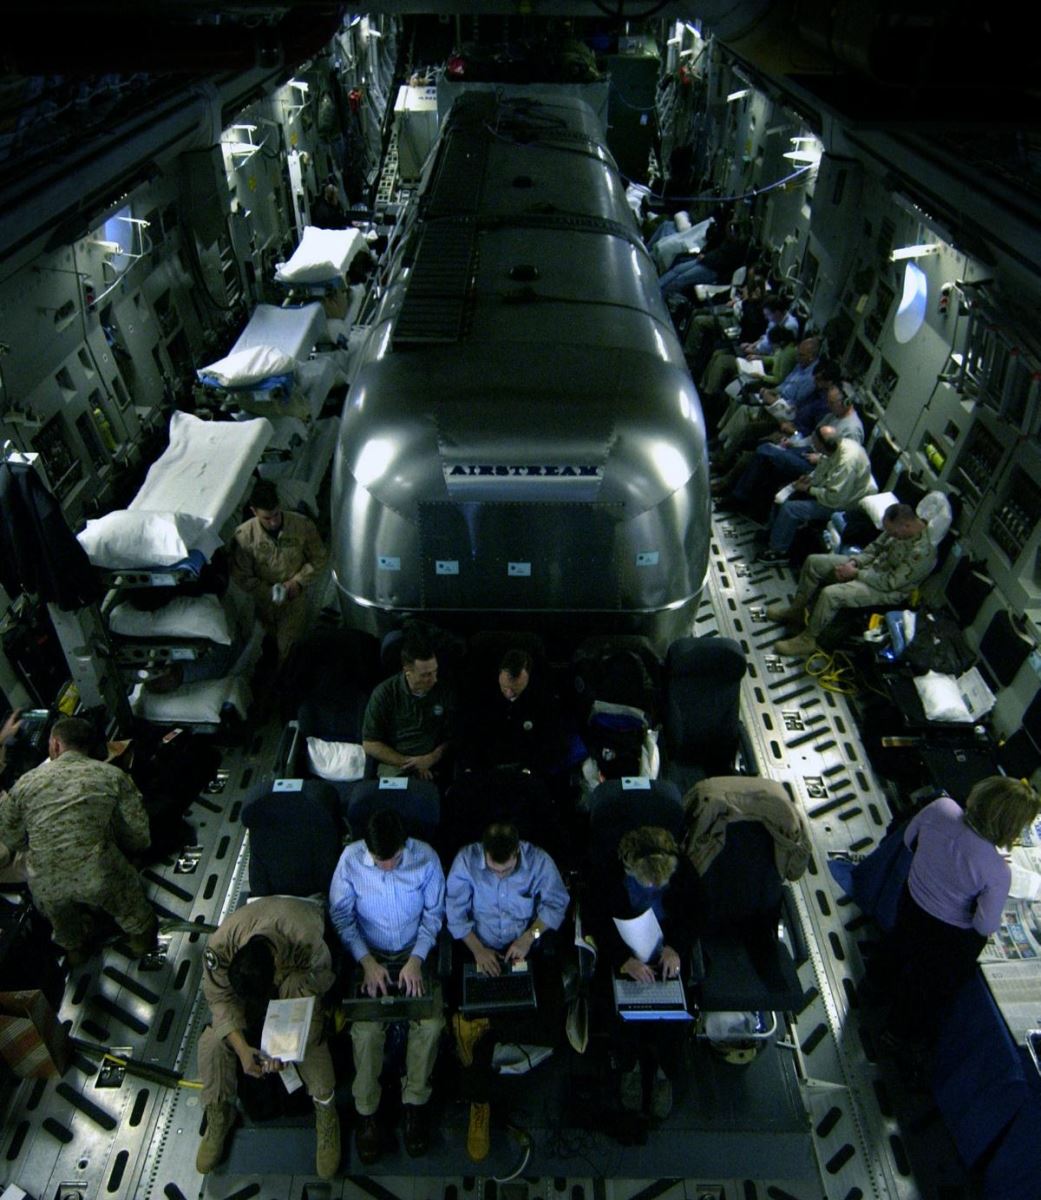 US government officals onboard a cargo plane